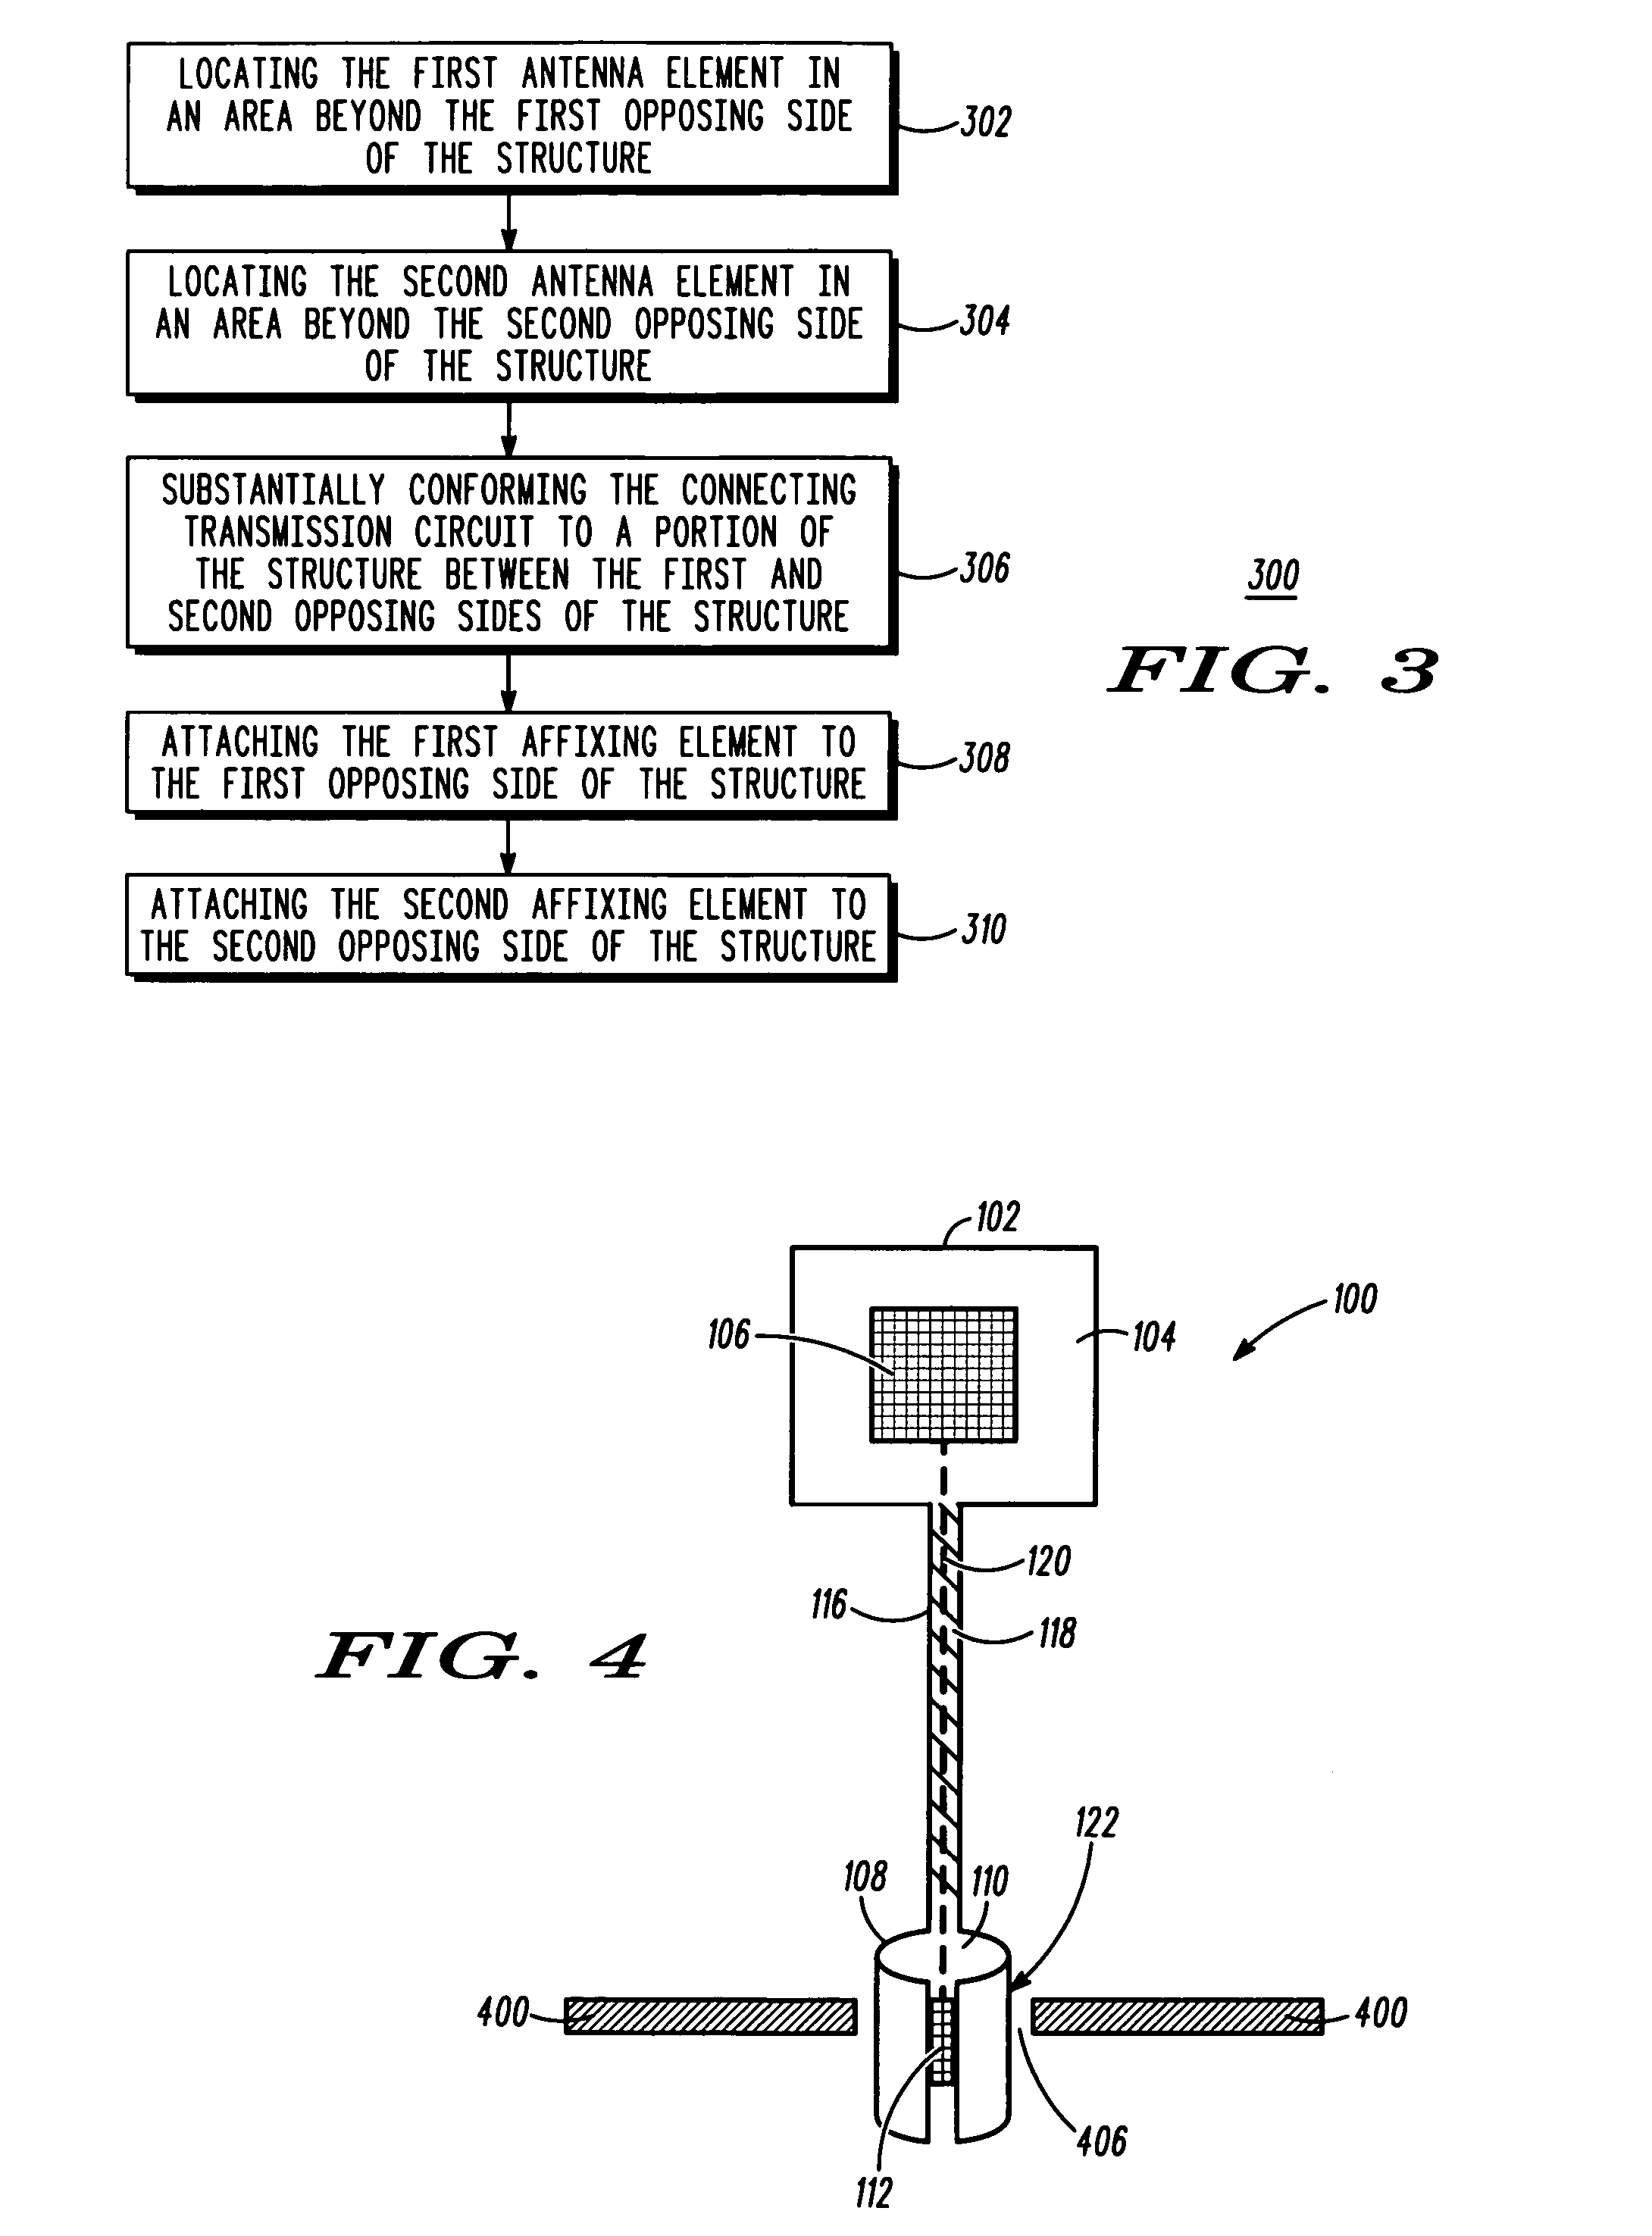 Passive repeater for radio frequency communications